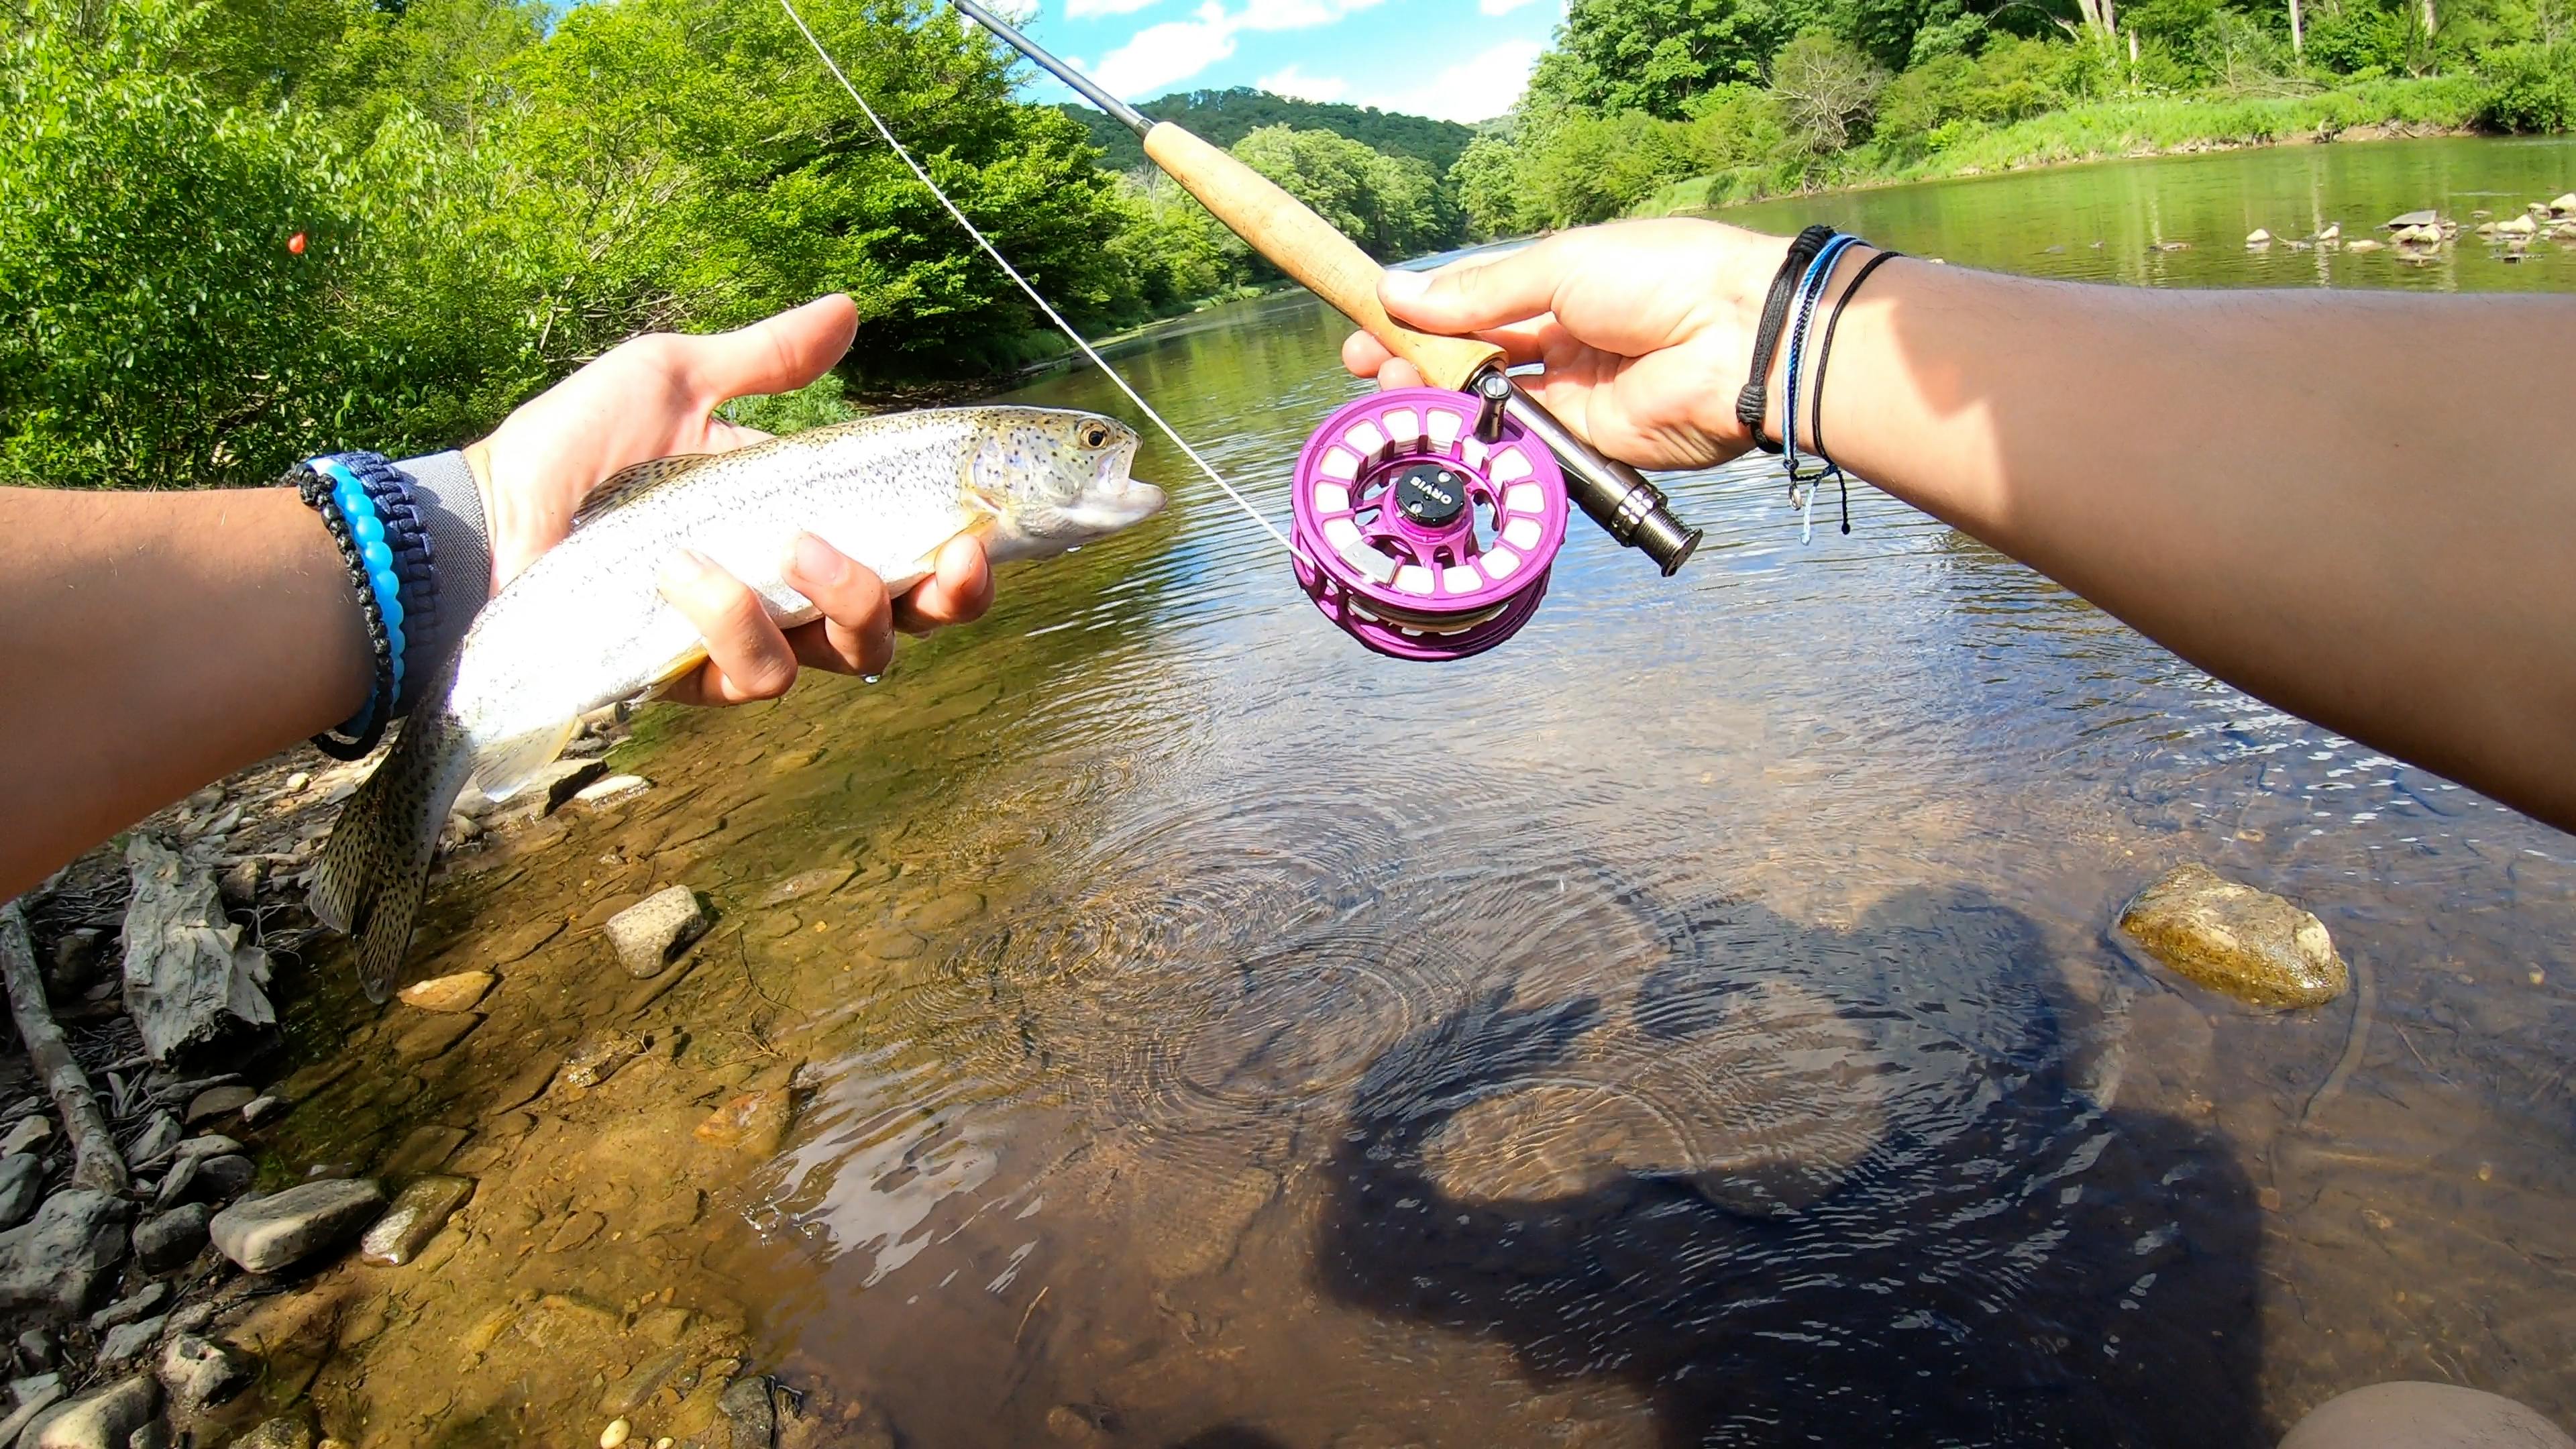 A fish being held over a river in one hand as the other hand is holding a fly fishing rod with a Orvis Hydros Fly Reel.